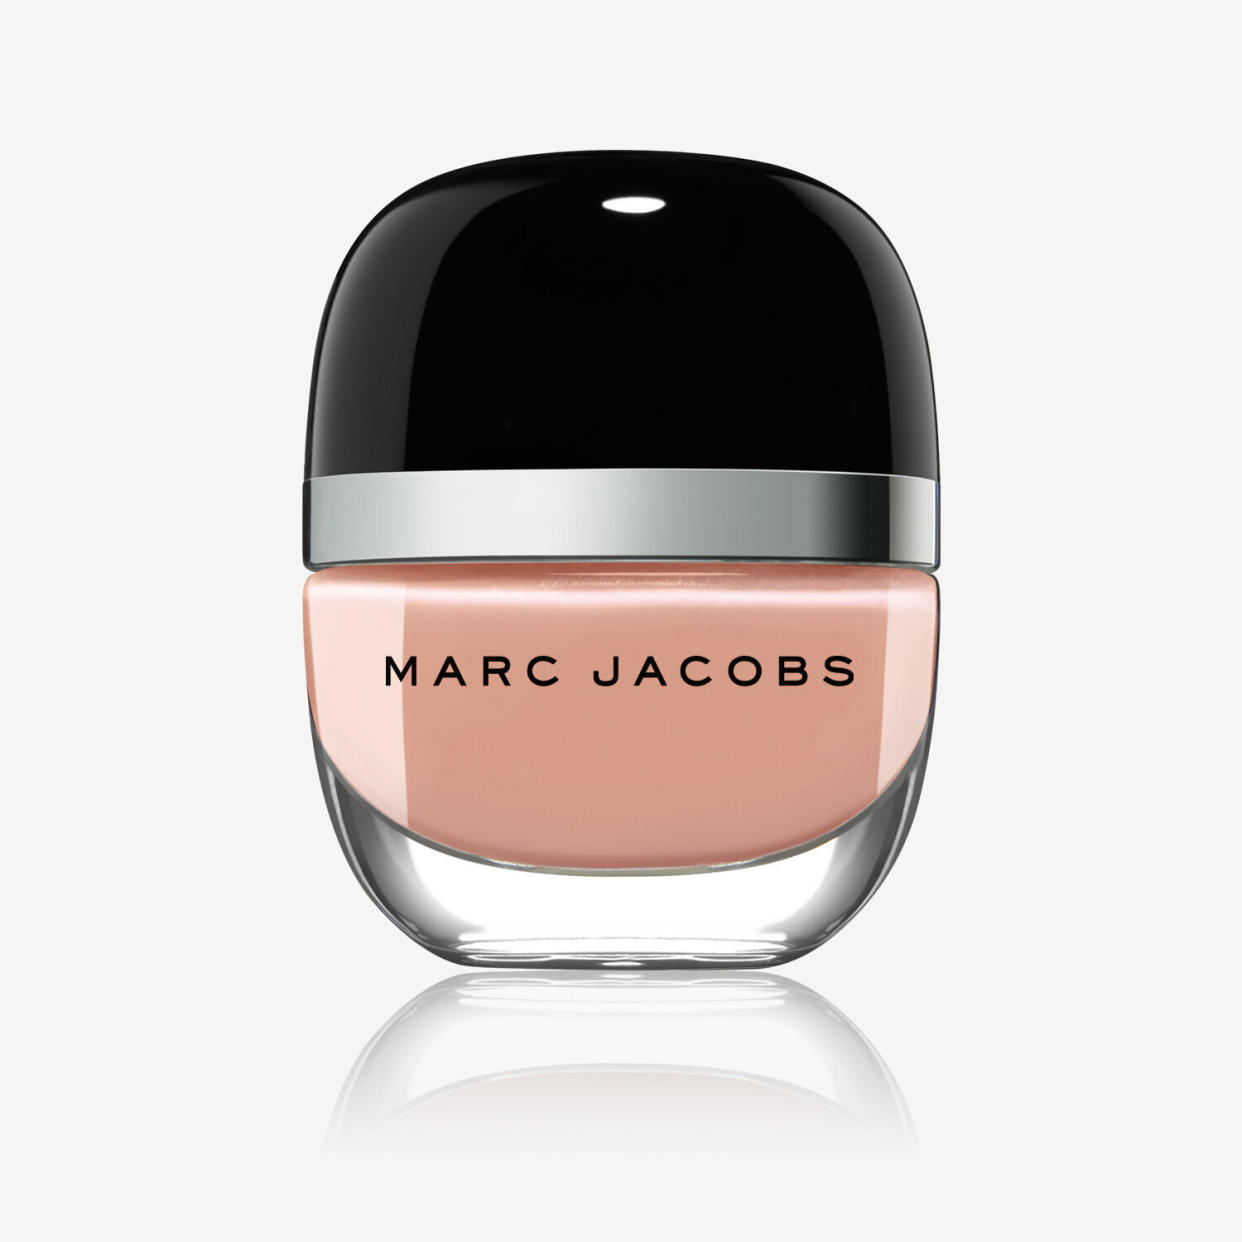 <a href="https://fave.co/3c1vaAA" target="_blank" rel="noopener noreferrer">Find it for $9 at Marc Jacobs Beauty</a>.